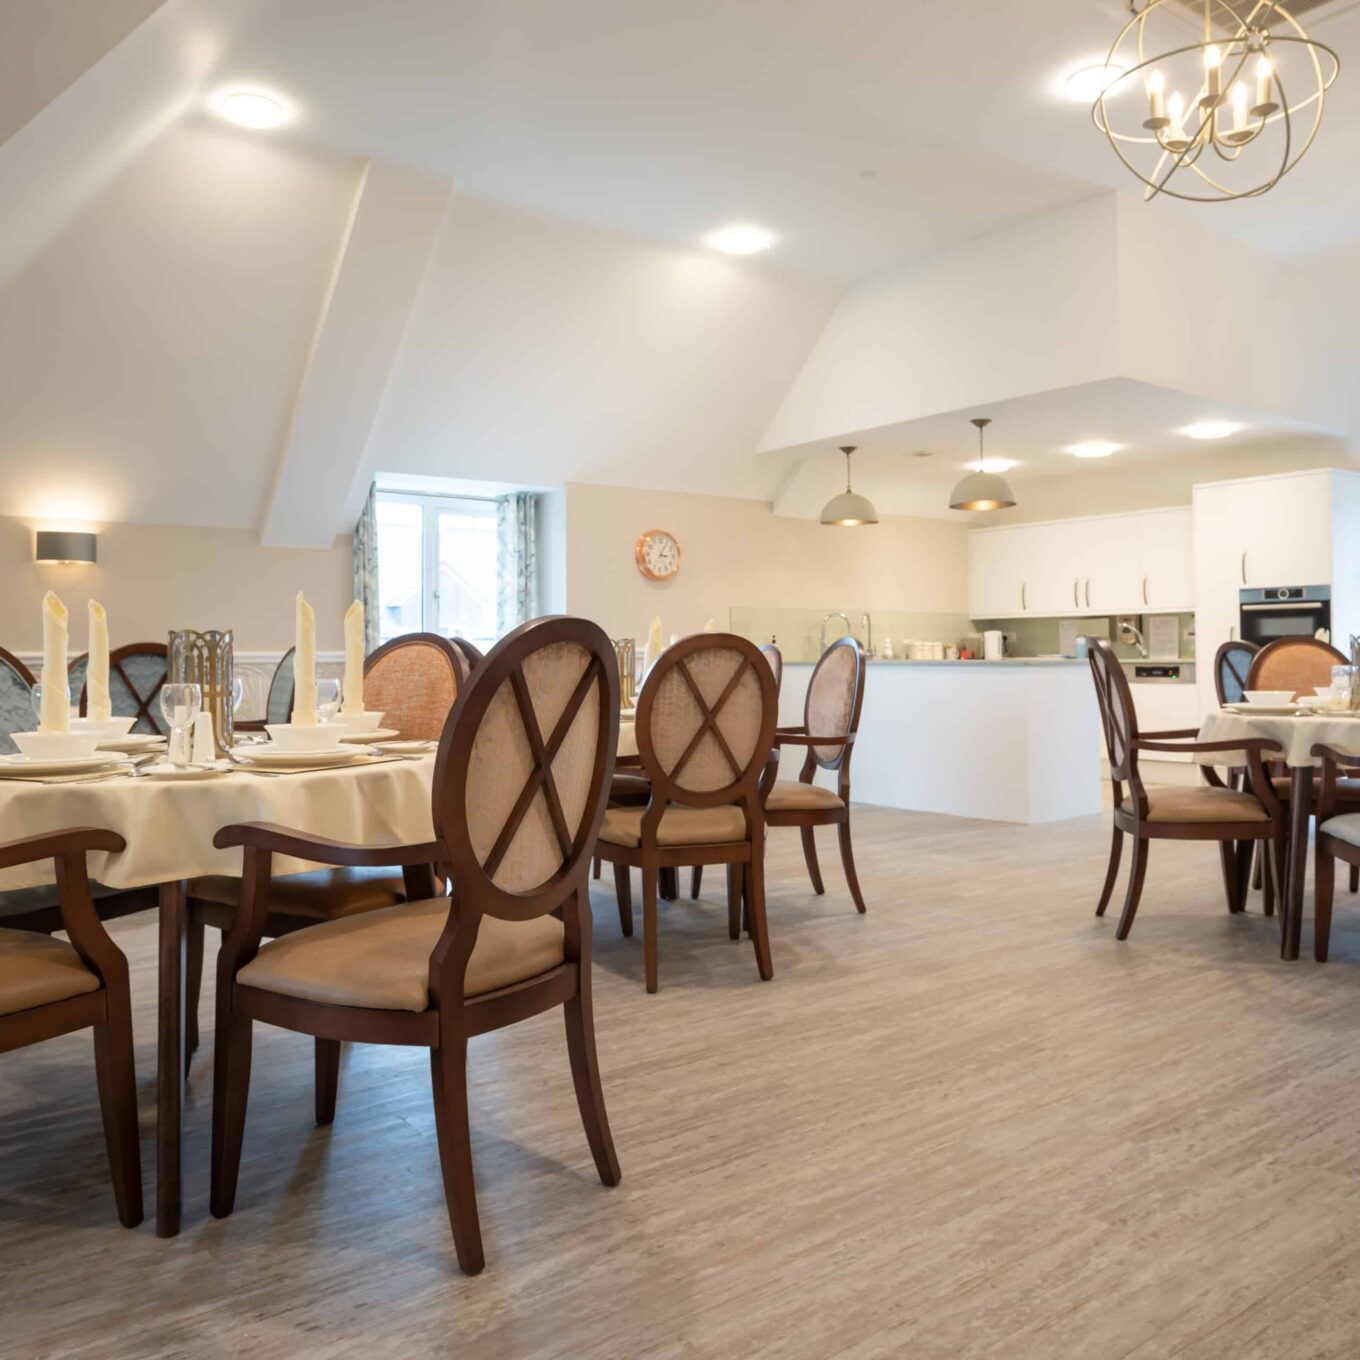 Dining area with table and chairs at Elmbook Court Care Home Wantage